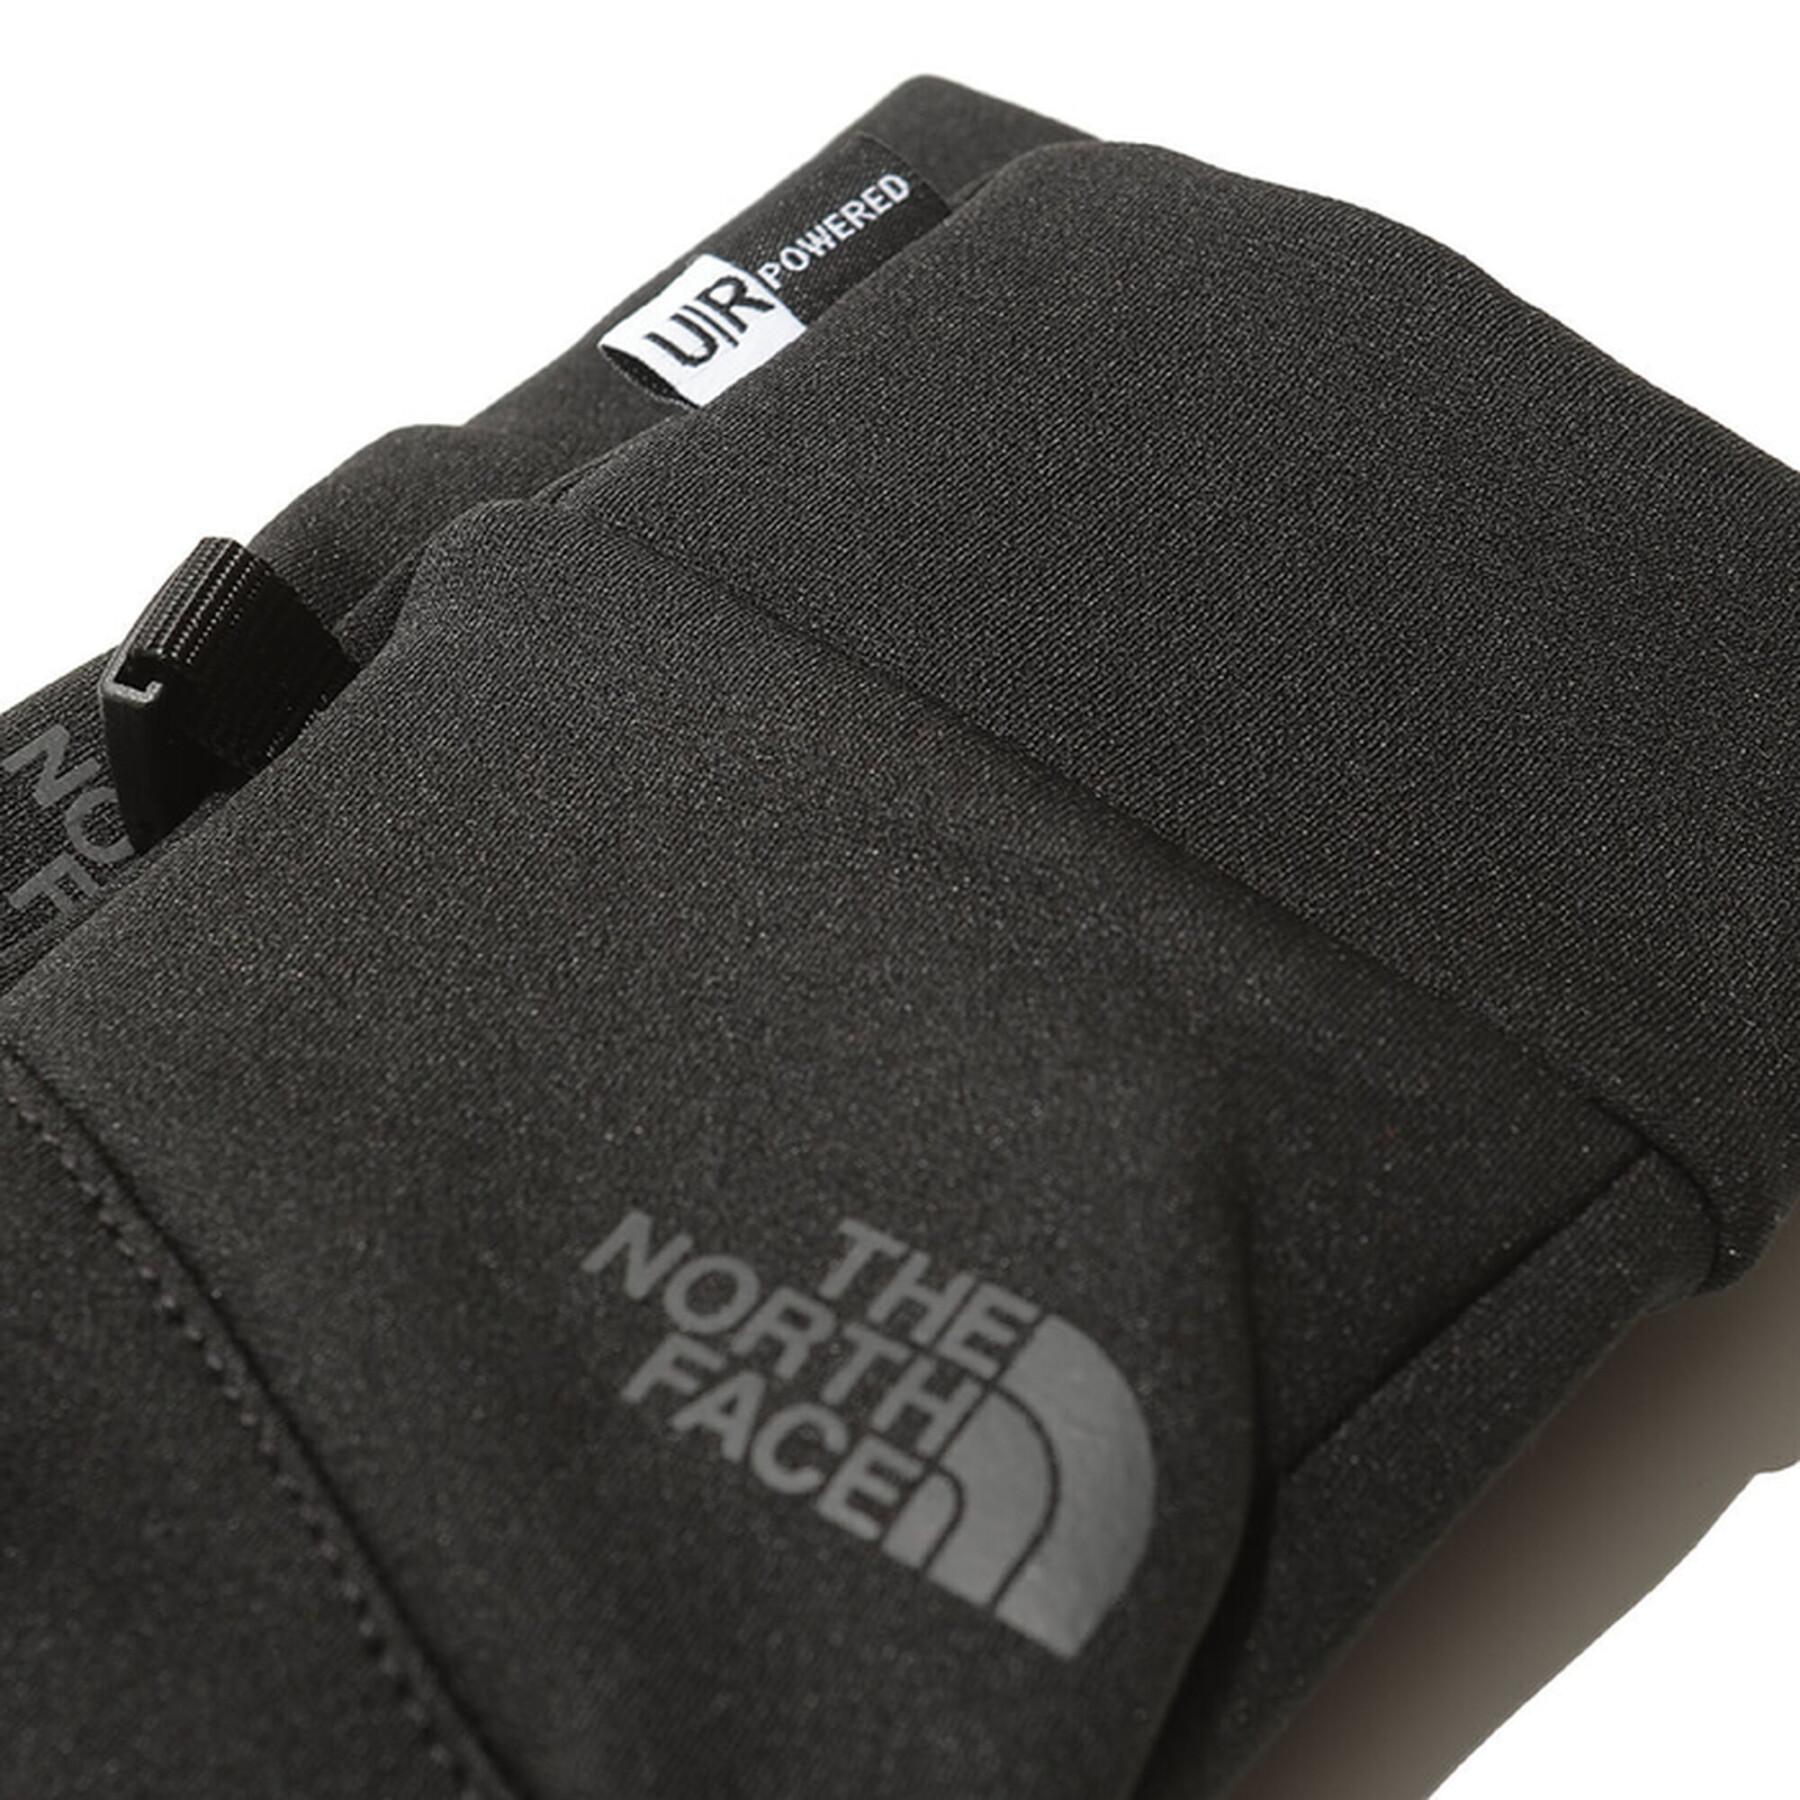 Handschuhe The North Face Hardface Etip